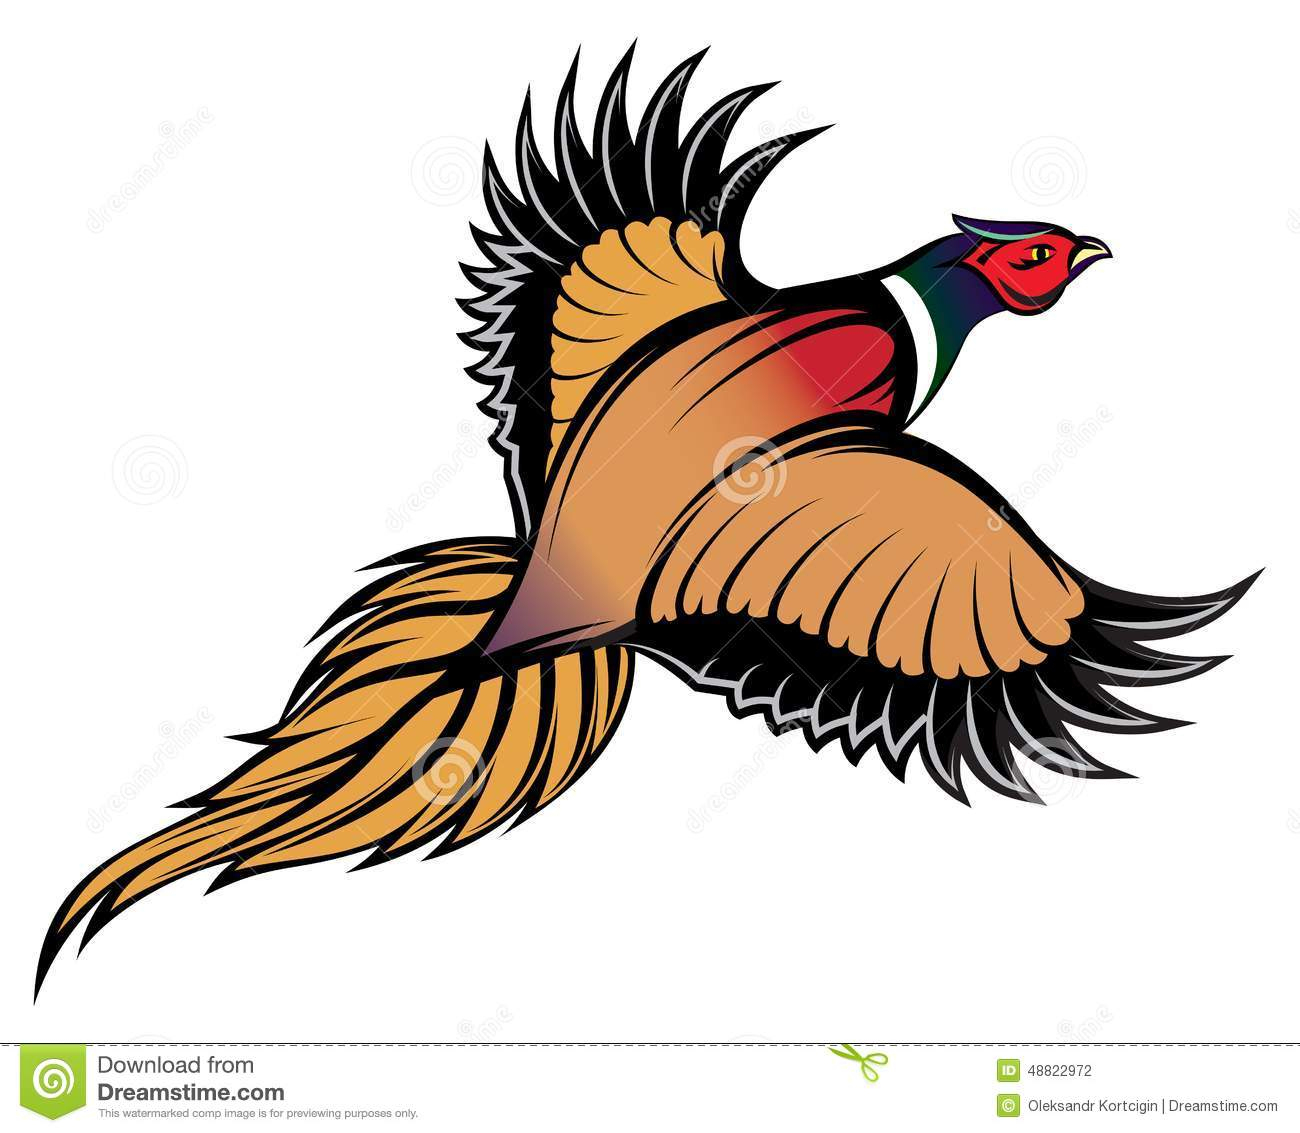 Illustration Of A Stylish Multi-Colored Flying Pheasant Stock Vector tout Dessin Faisan 